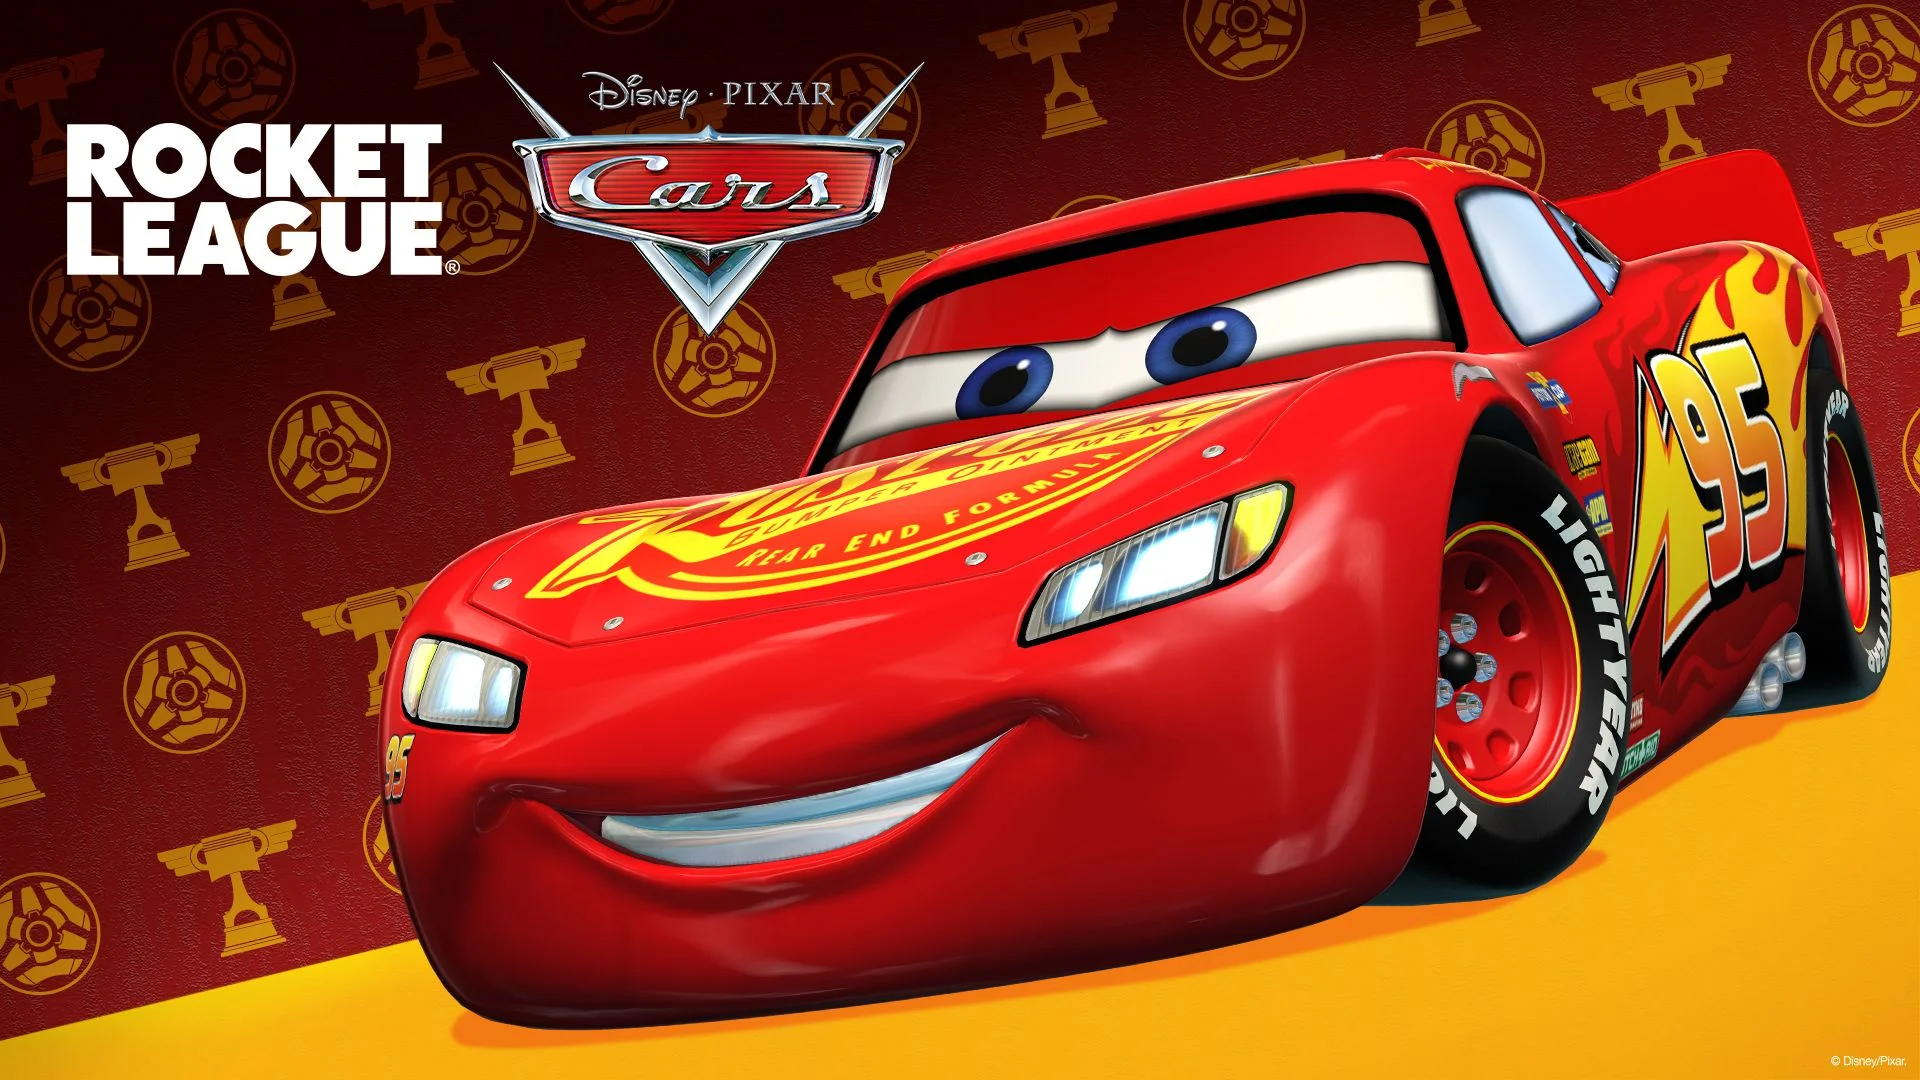 Lightning McQueen from the cartoon "Cars" will appear in the arcade racing football